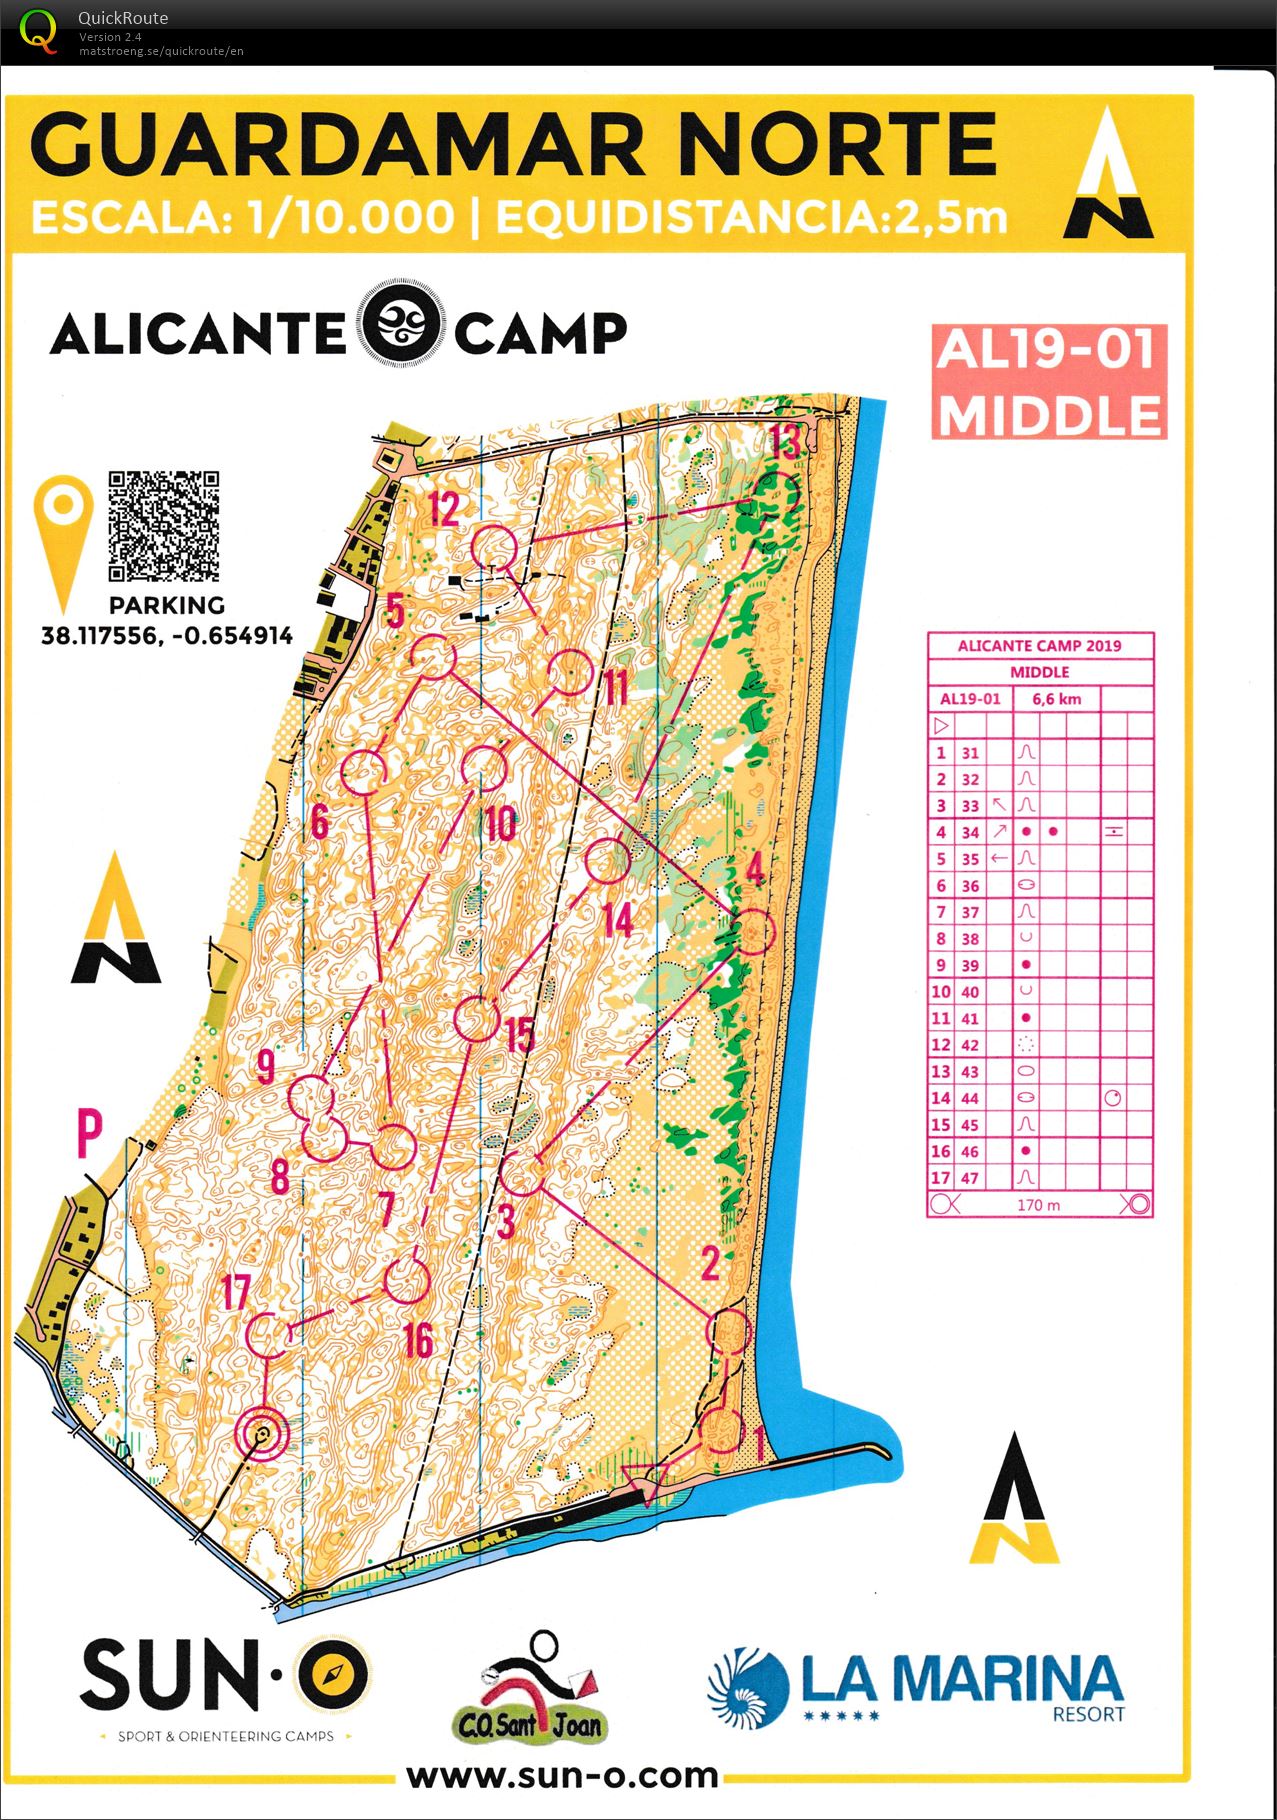 TC Alicante #7, middle rychle (23-01-2019)